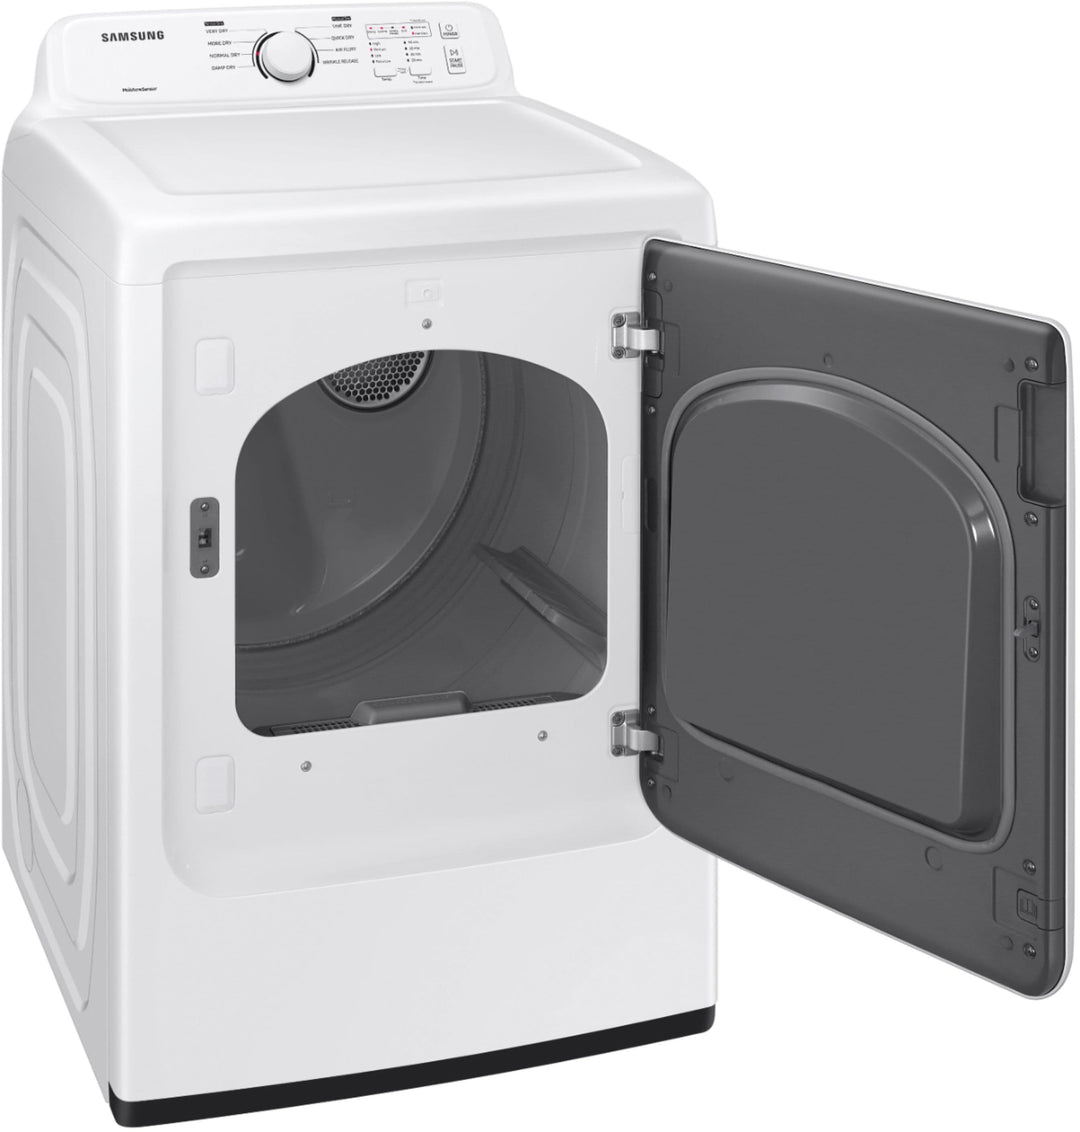 Samsung - 7.2 Cu. Ft. Electric Dryer with Sensor Dry and 8 Drying Cycles - White_7